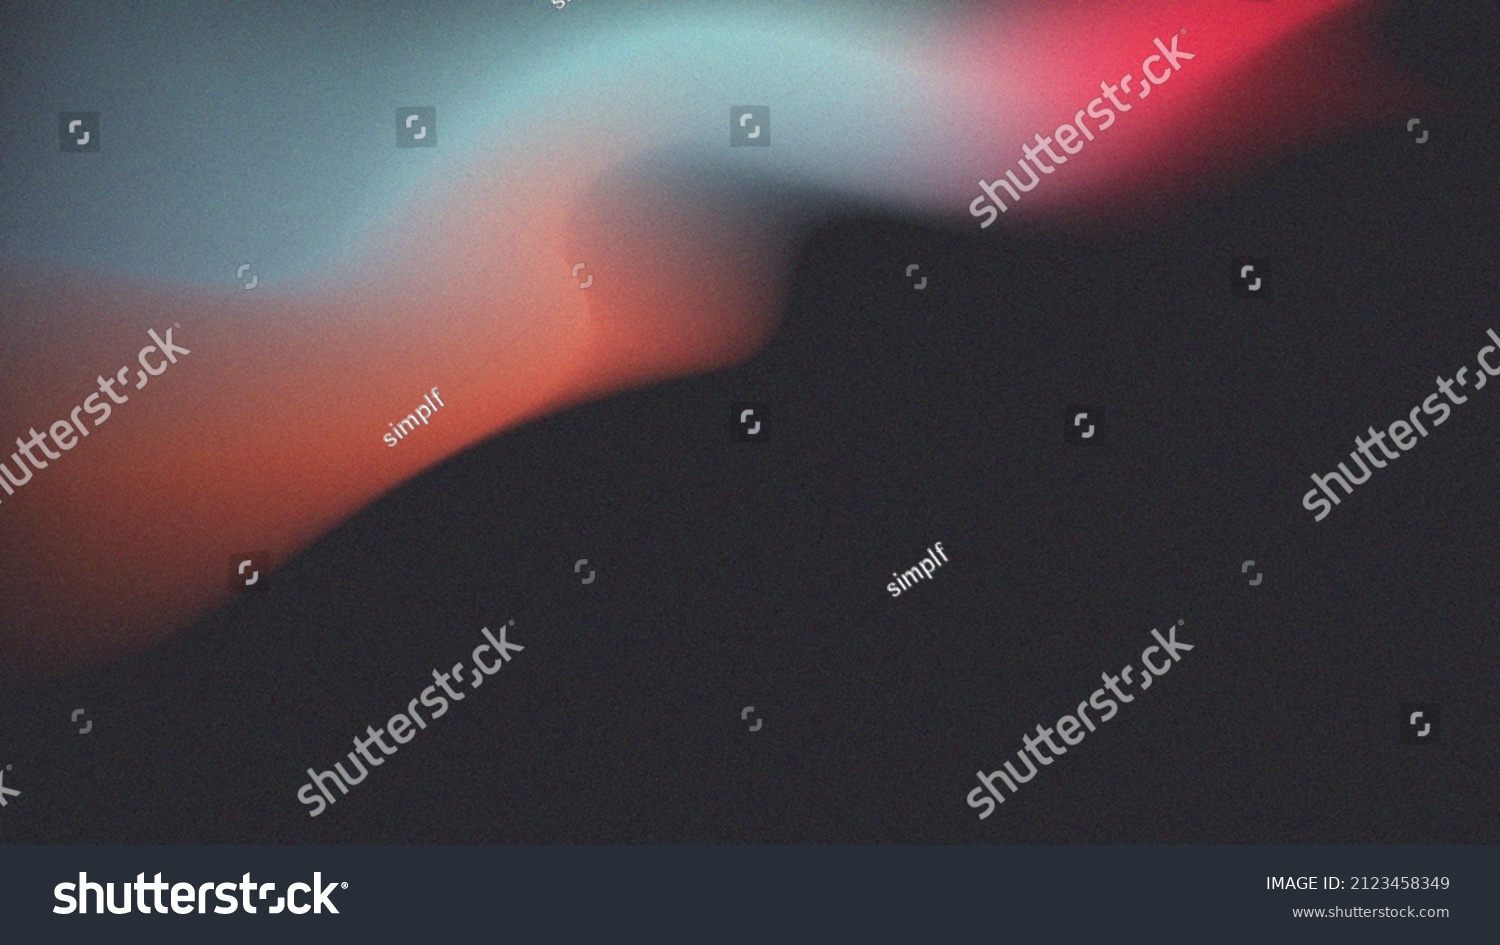 Abstract color gradient, modern blurred background and film grain texture, template with an elegant design concept, minimal style composition, Trendy Gradient grainy texture for your graphic design. #2123458349